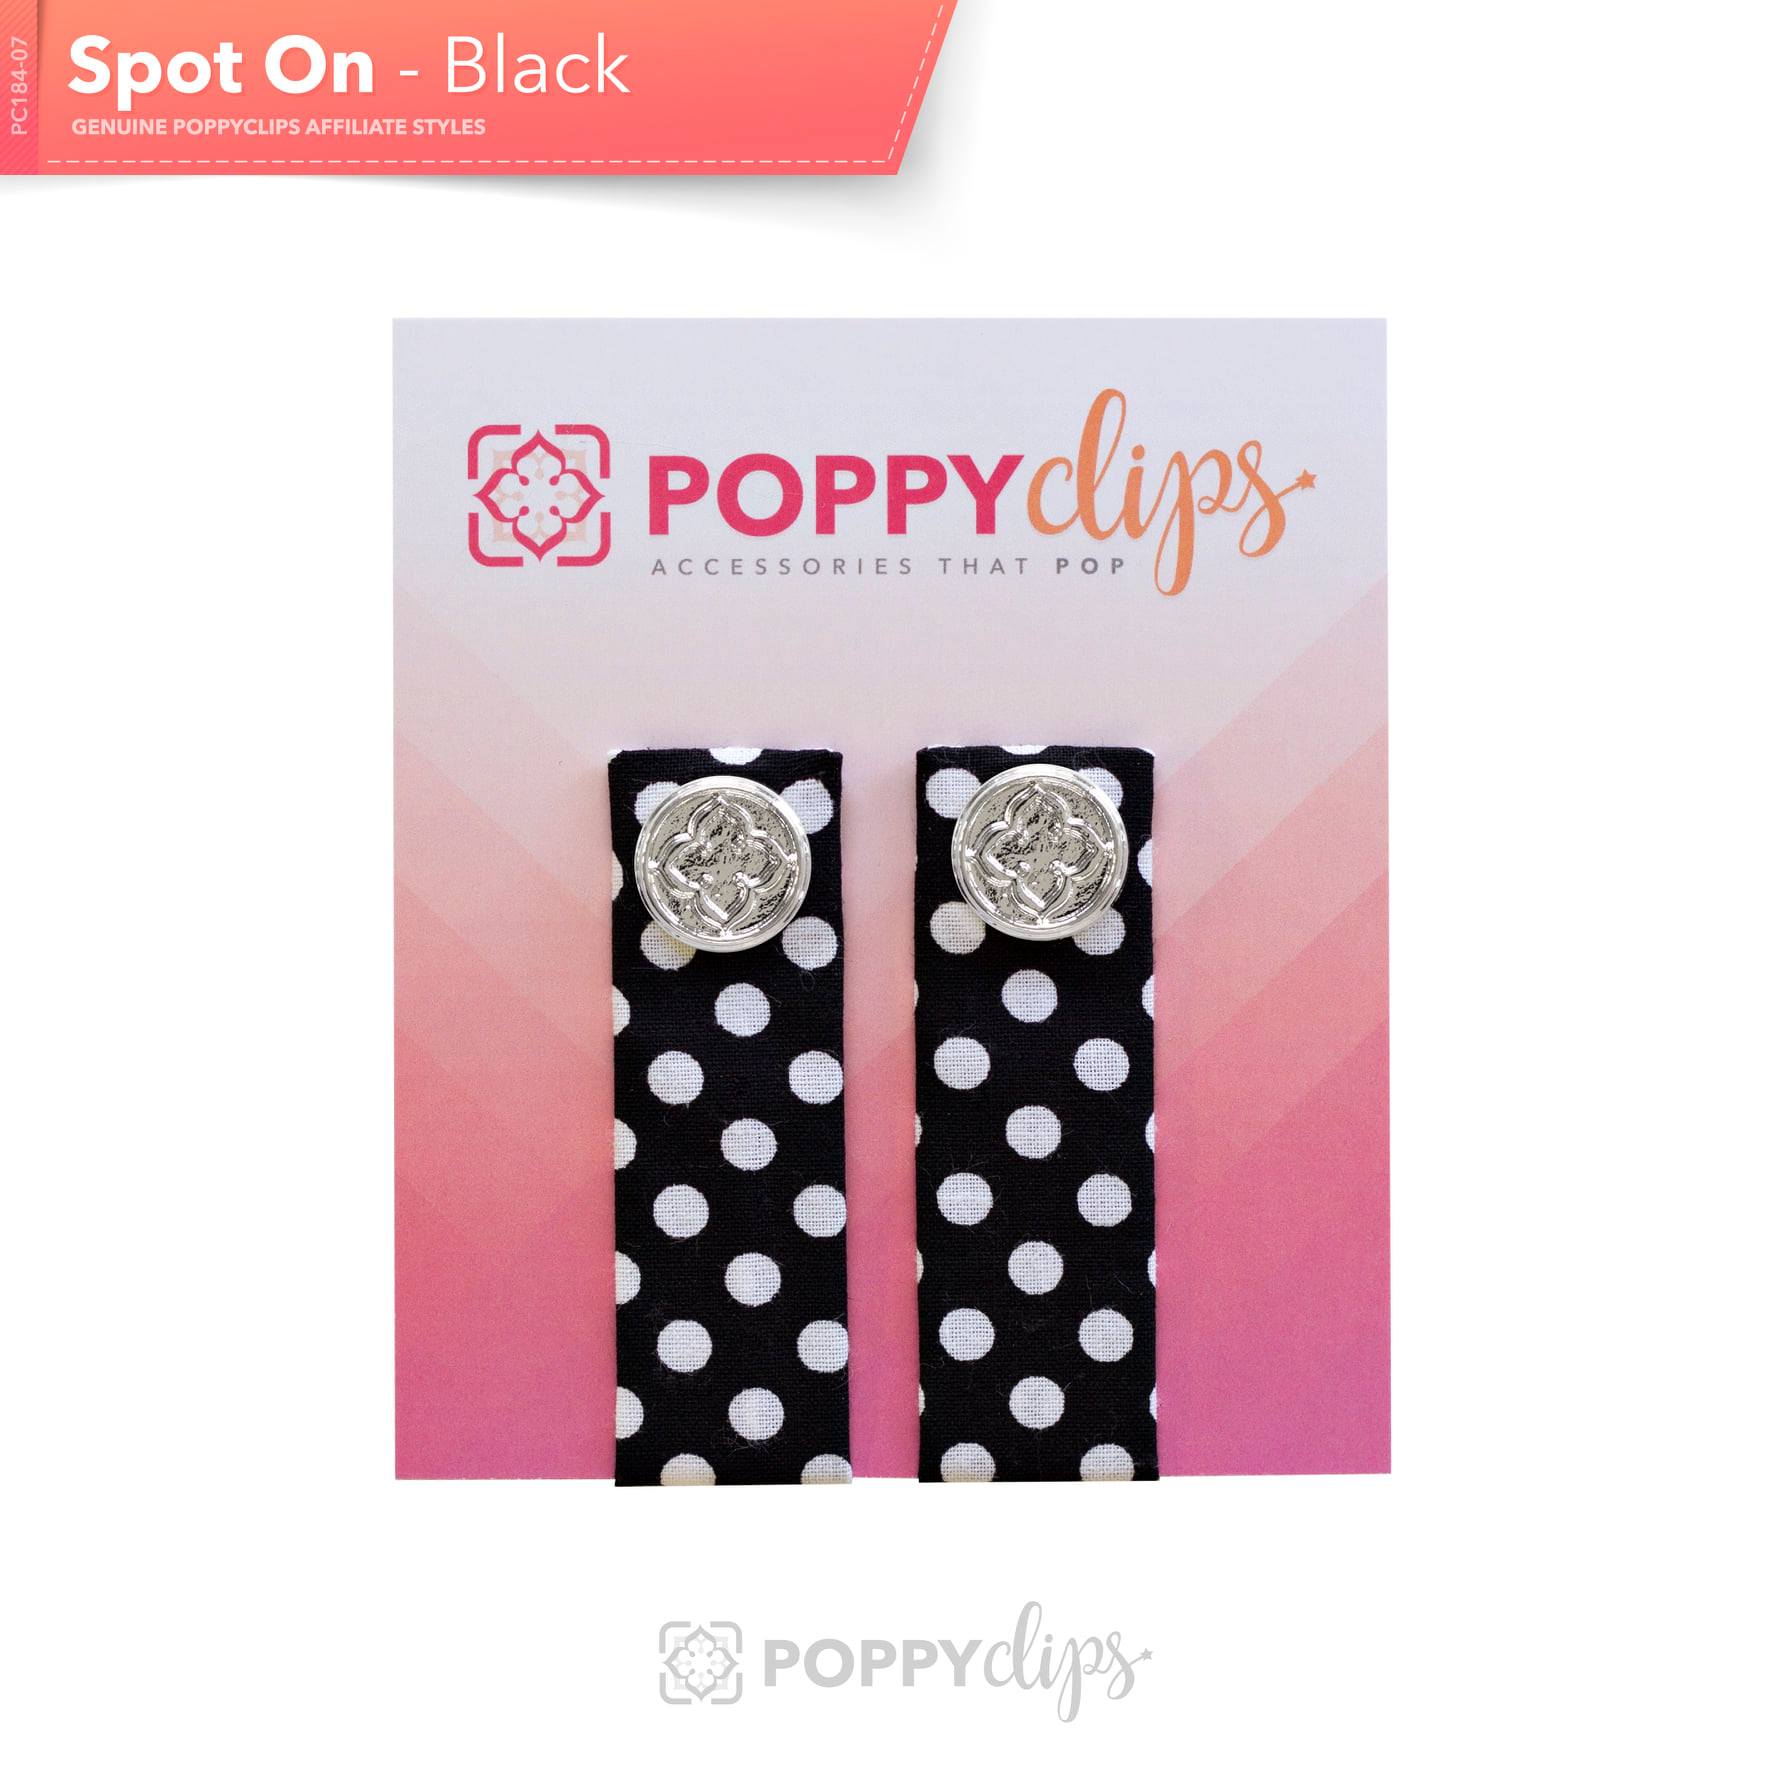 Two 5 ¼” long by 7/8” wide black material with white polka dots, and a magnet at each end.  The outer magnet is a decorative silver medallion with the company logo. 